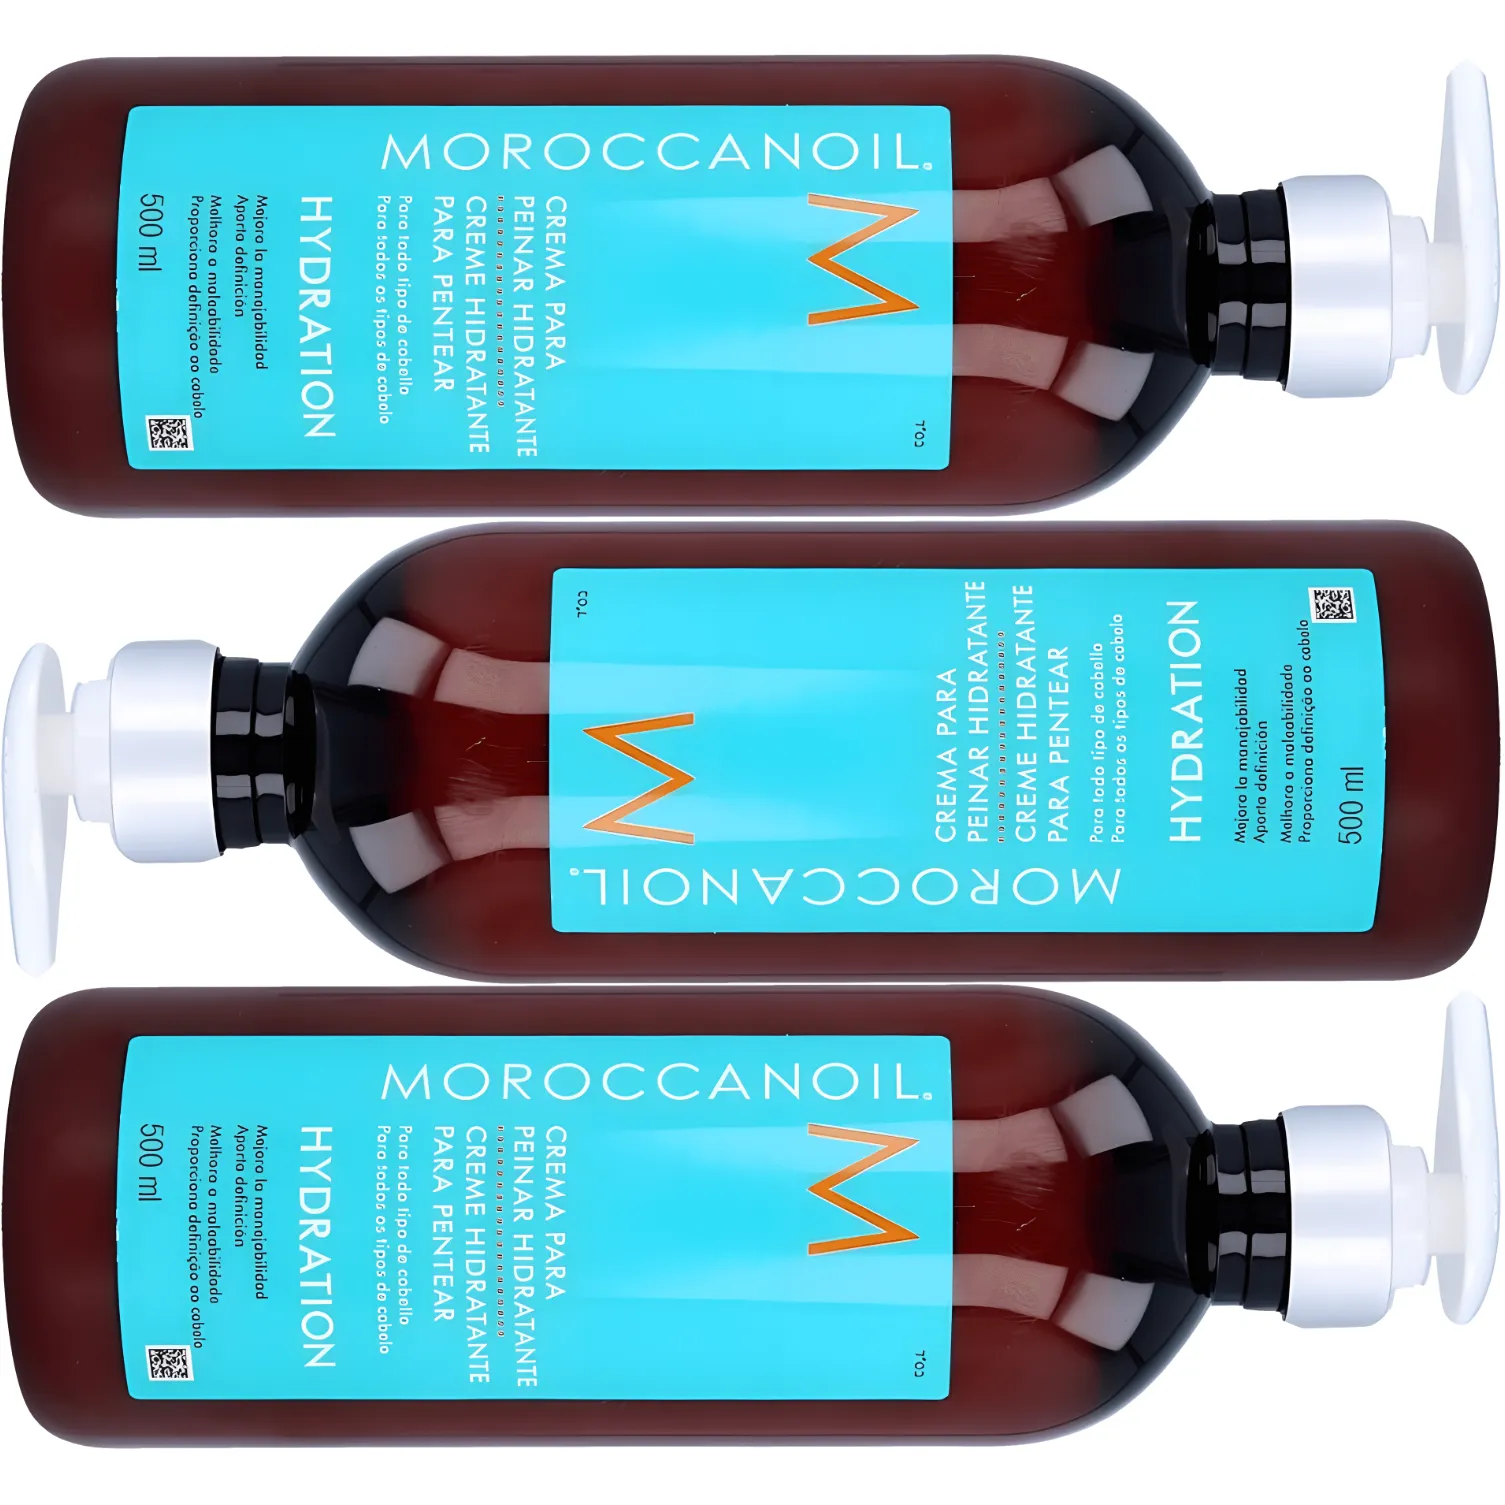 Free Moroccanoil Hydrating Styling Cream